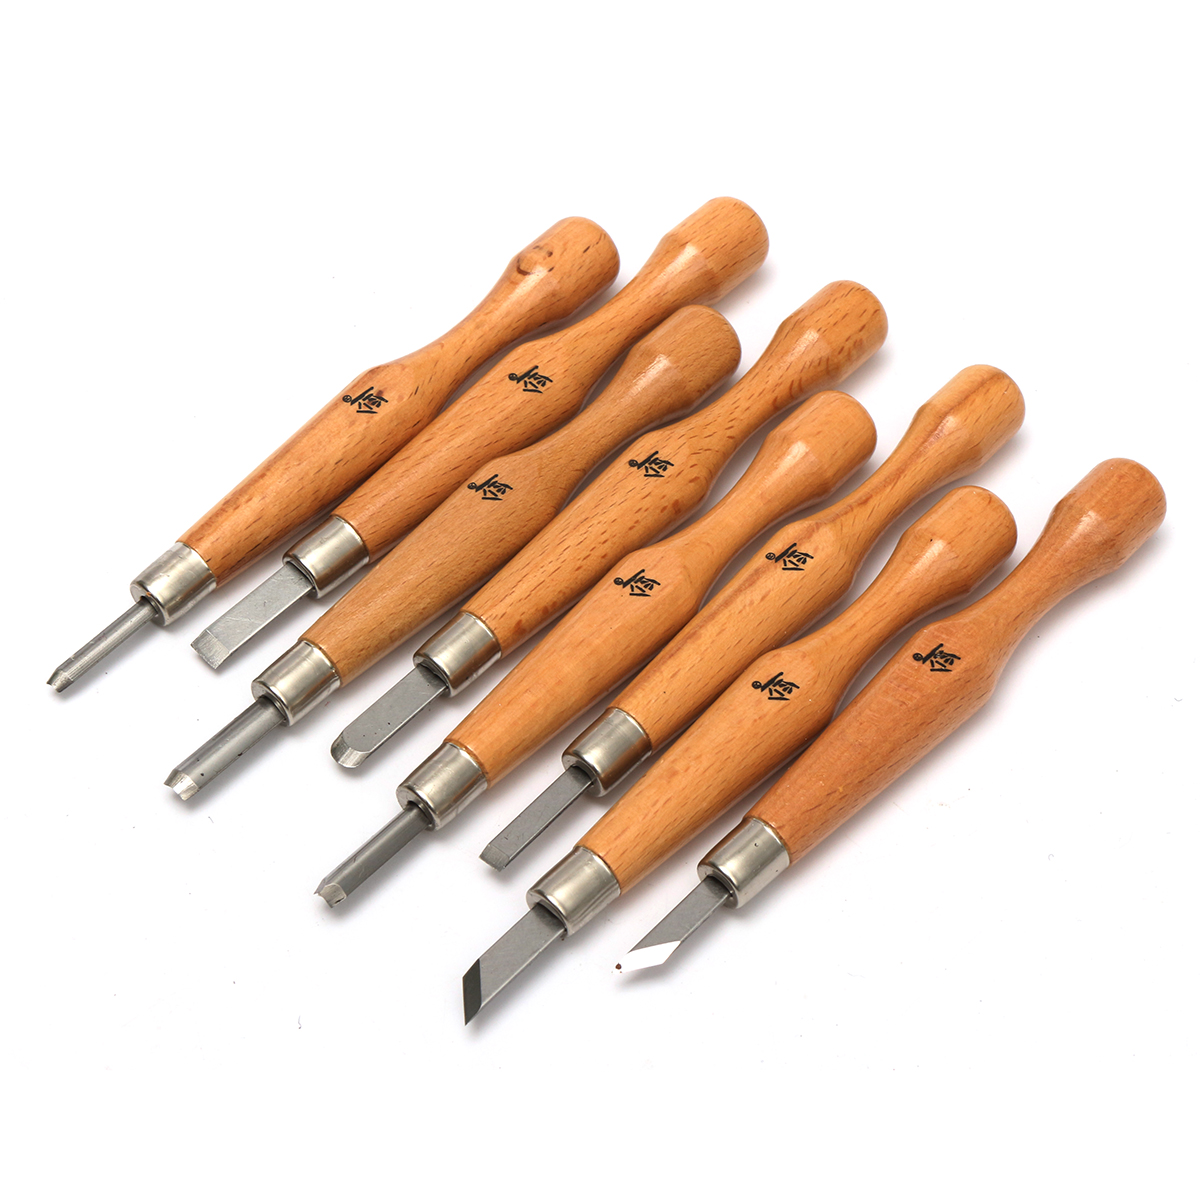 Other Hand Tools - 8Pcs Professional Carbon Steel Chisel ...